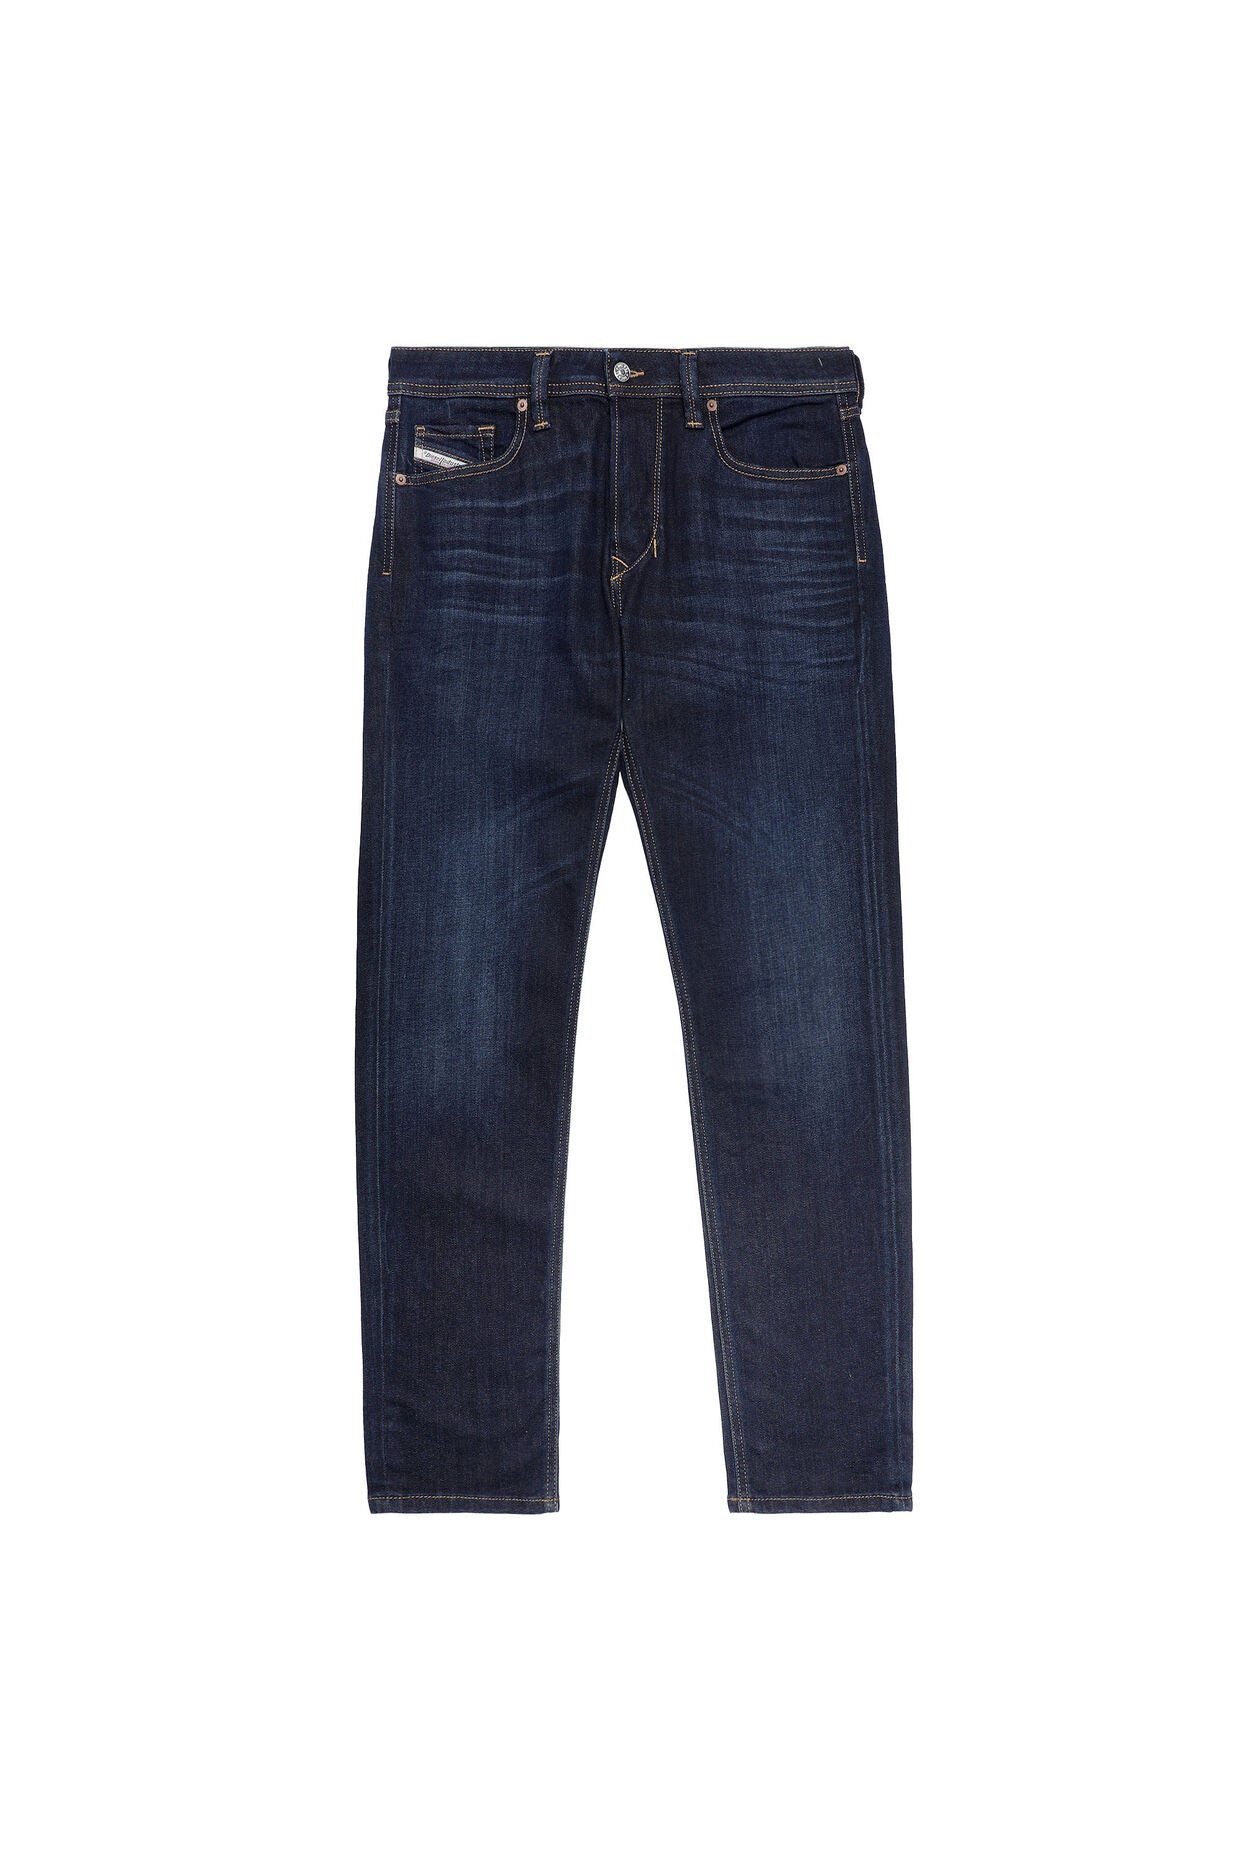 DIESEL Tapered Jeans 1986 Larkee-Beex 009zs